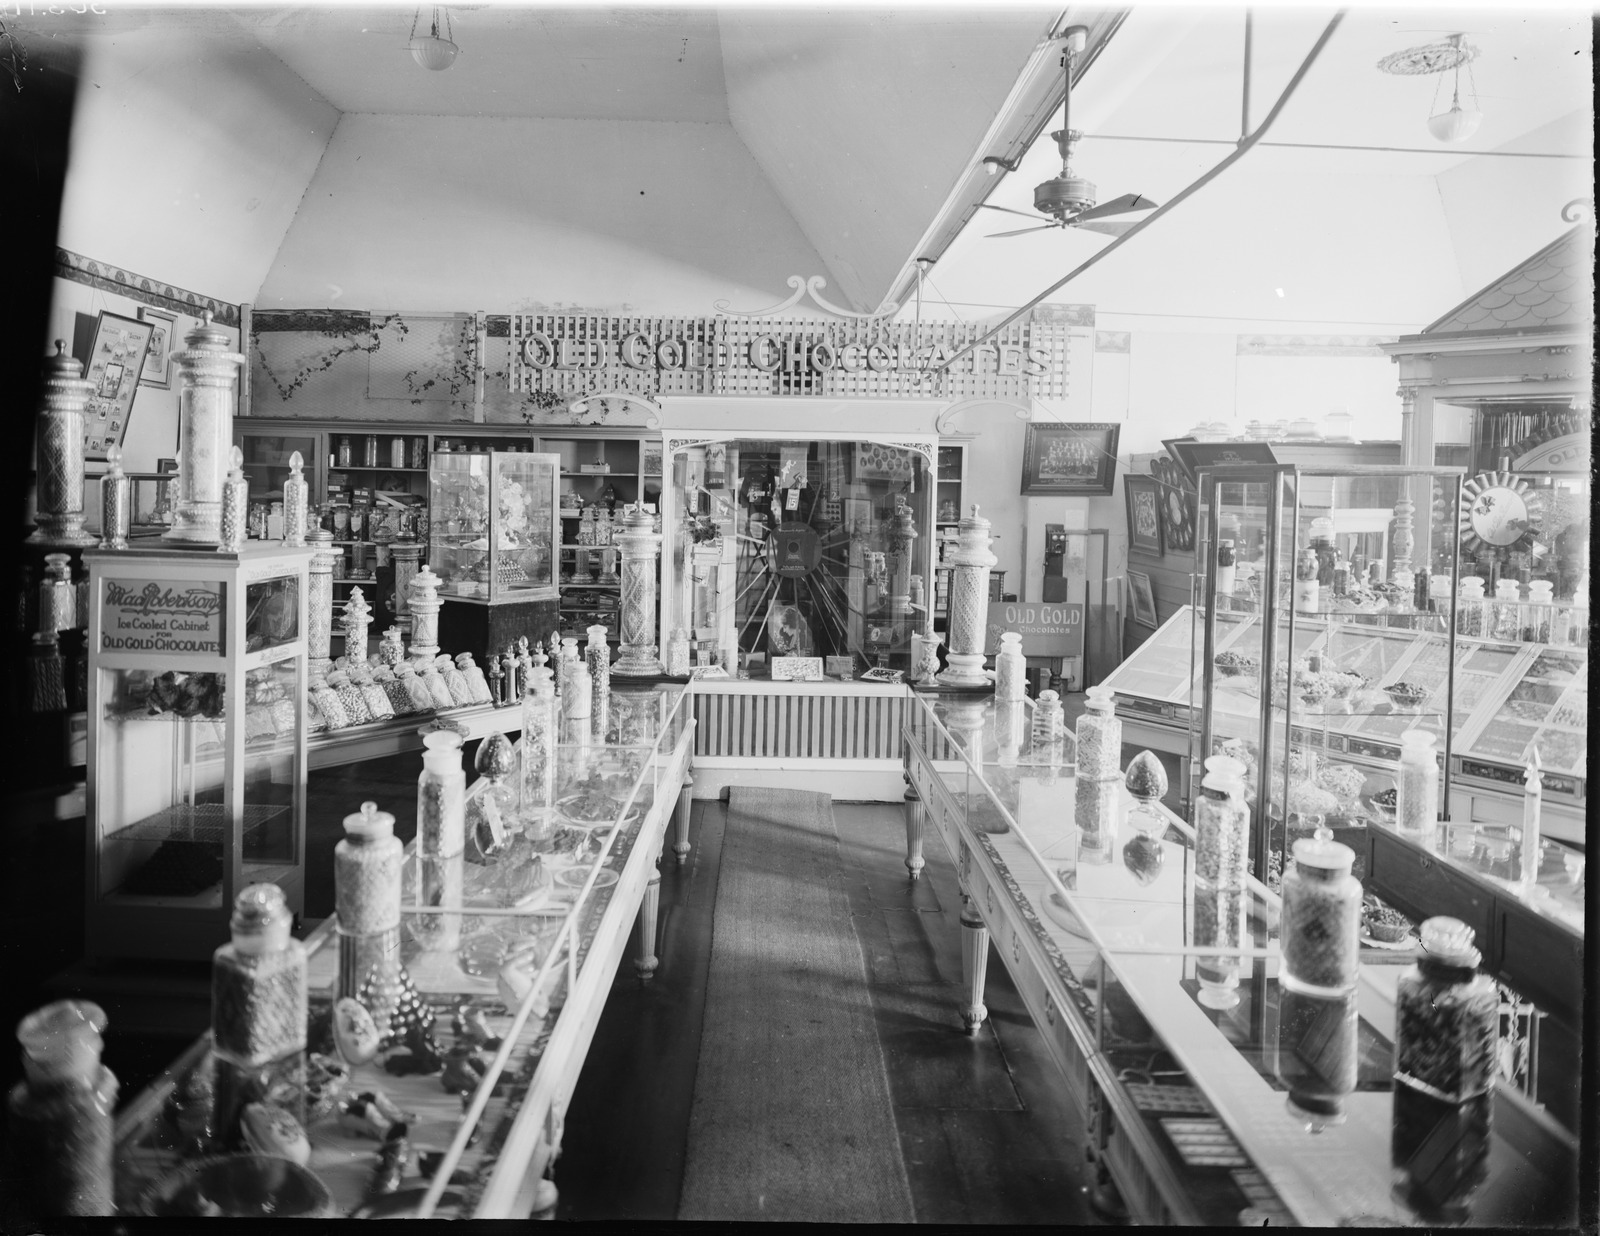 Exhibition of Macrobertson's products, c. 1910-1940